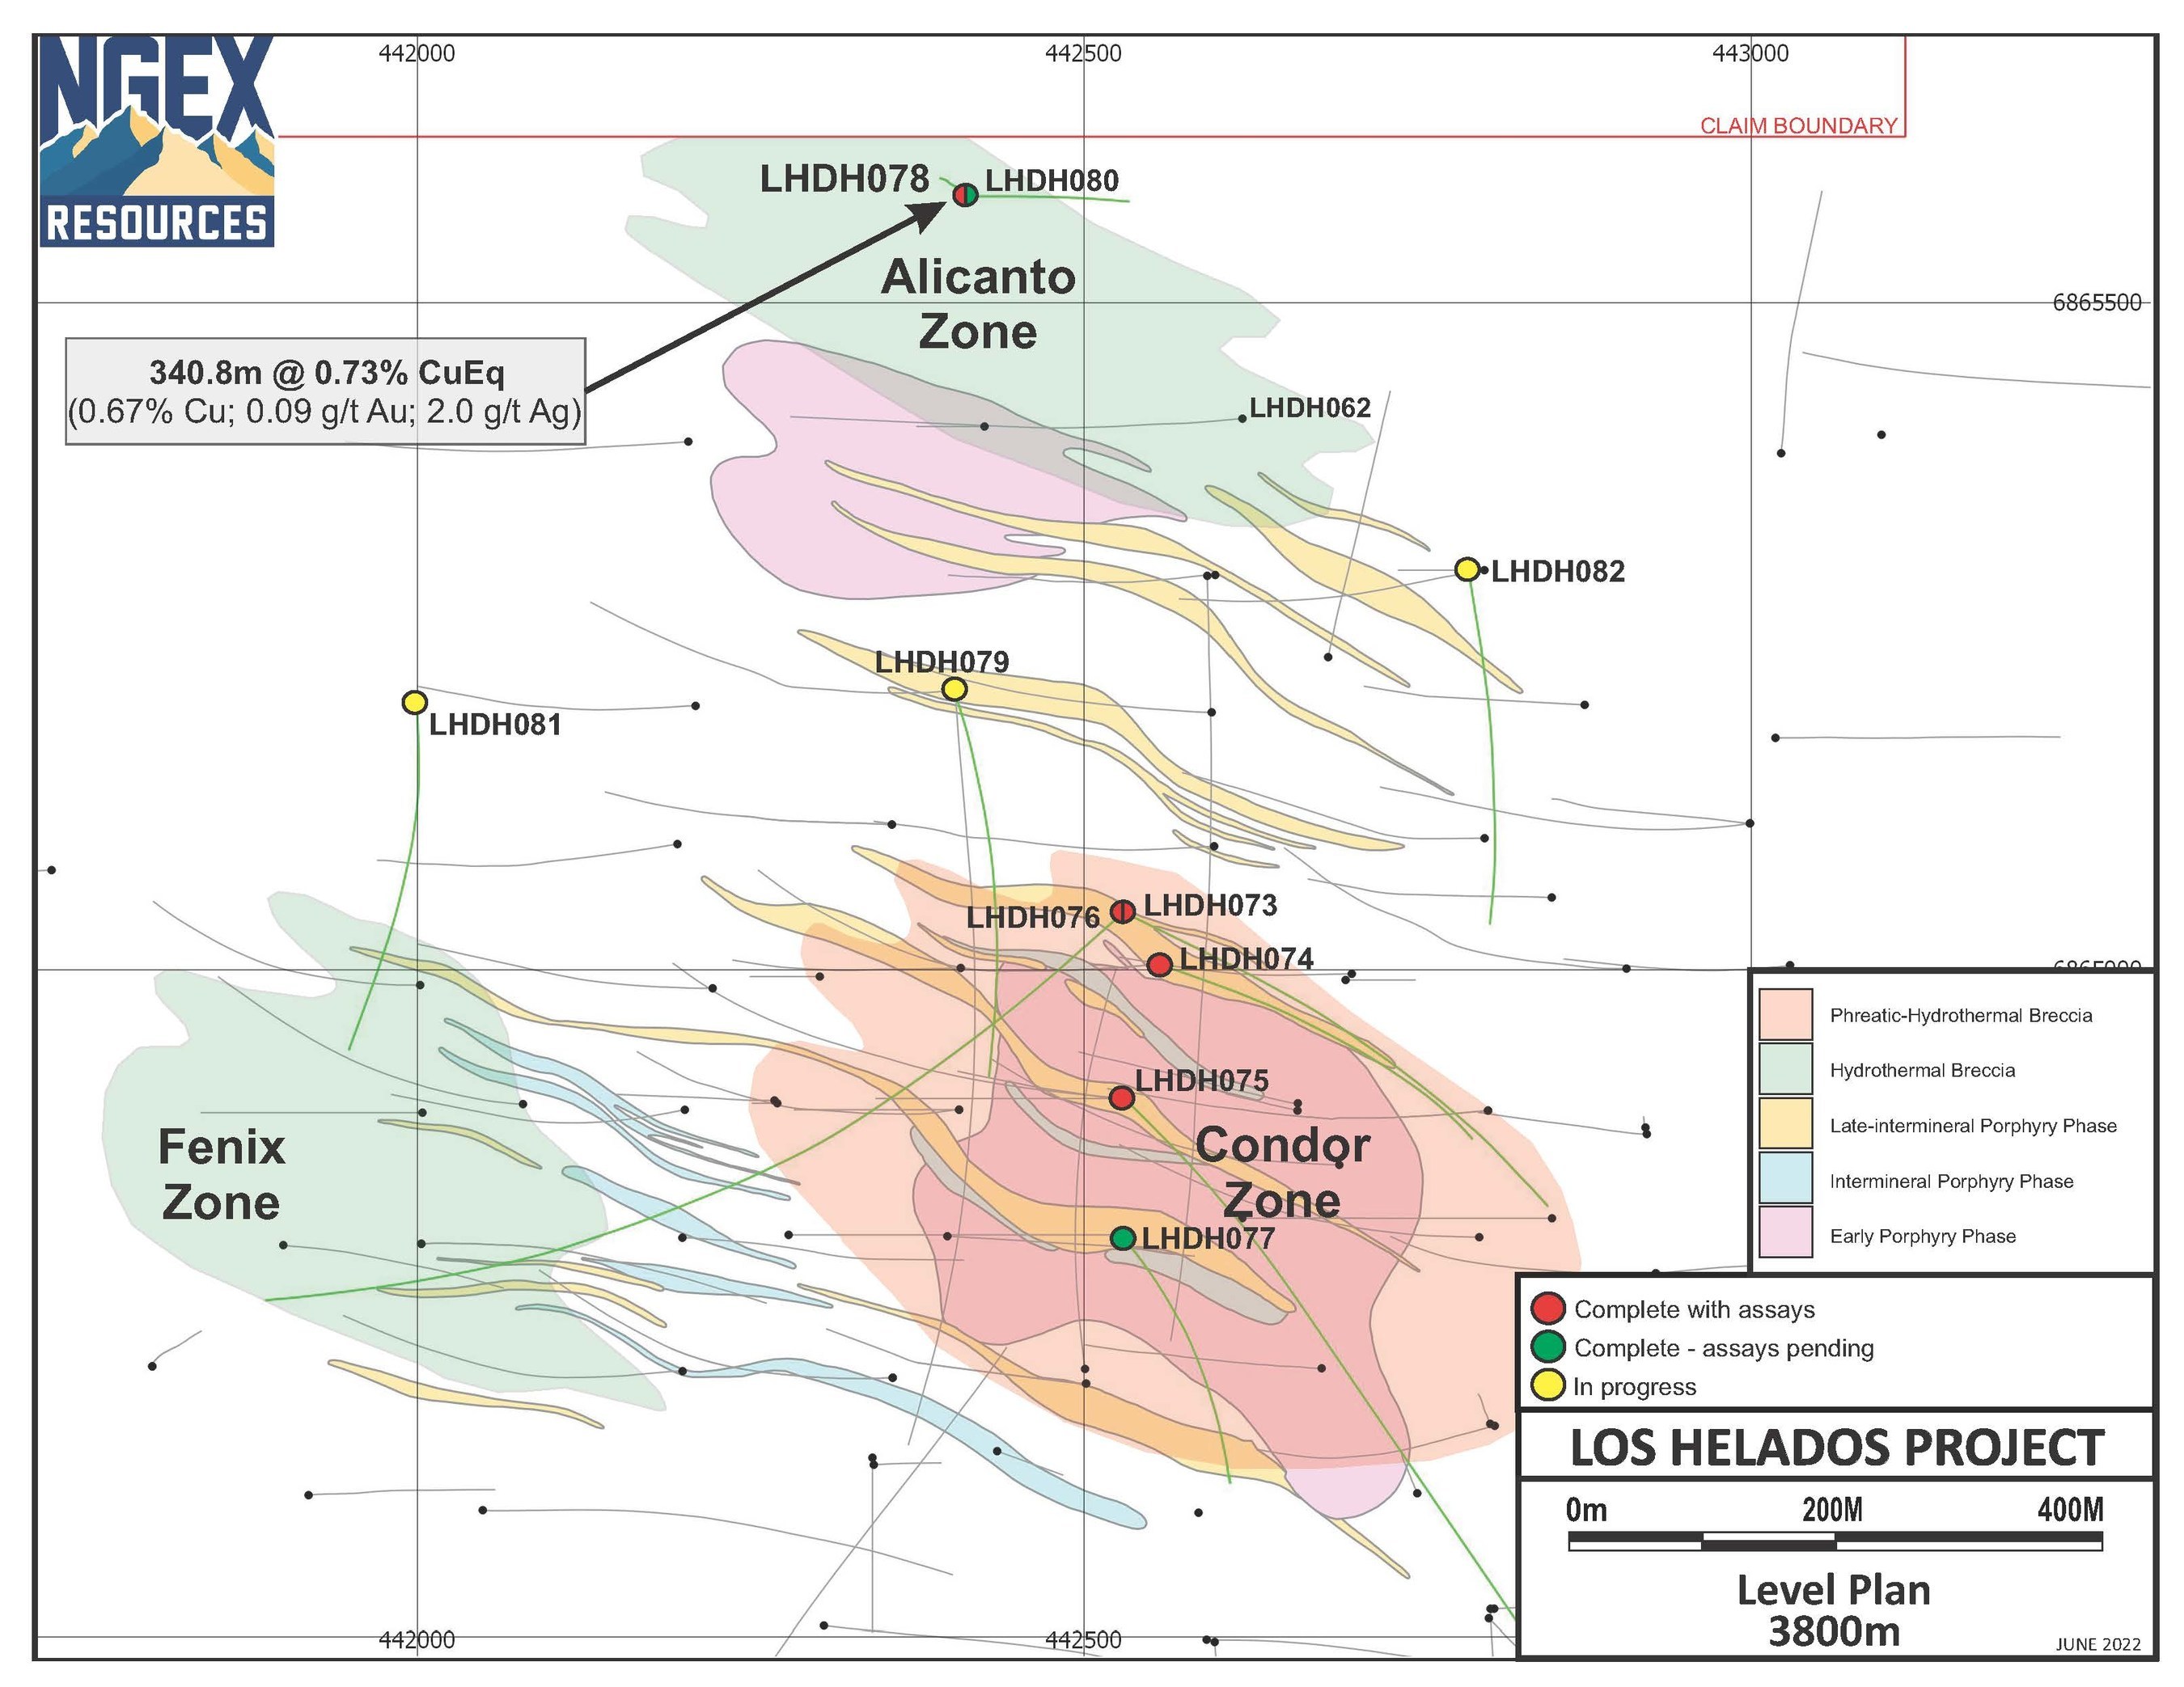 LHDH078: Results released today; tested for confirmation and extension of a third structural corridor; discoveredhigh-grade Alicanto Zone as confirmation of this third corridor (CNW Group/NGEx Minerals Ltd.)